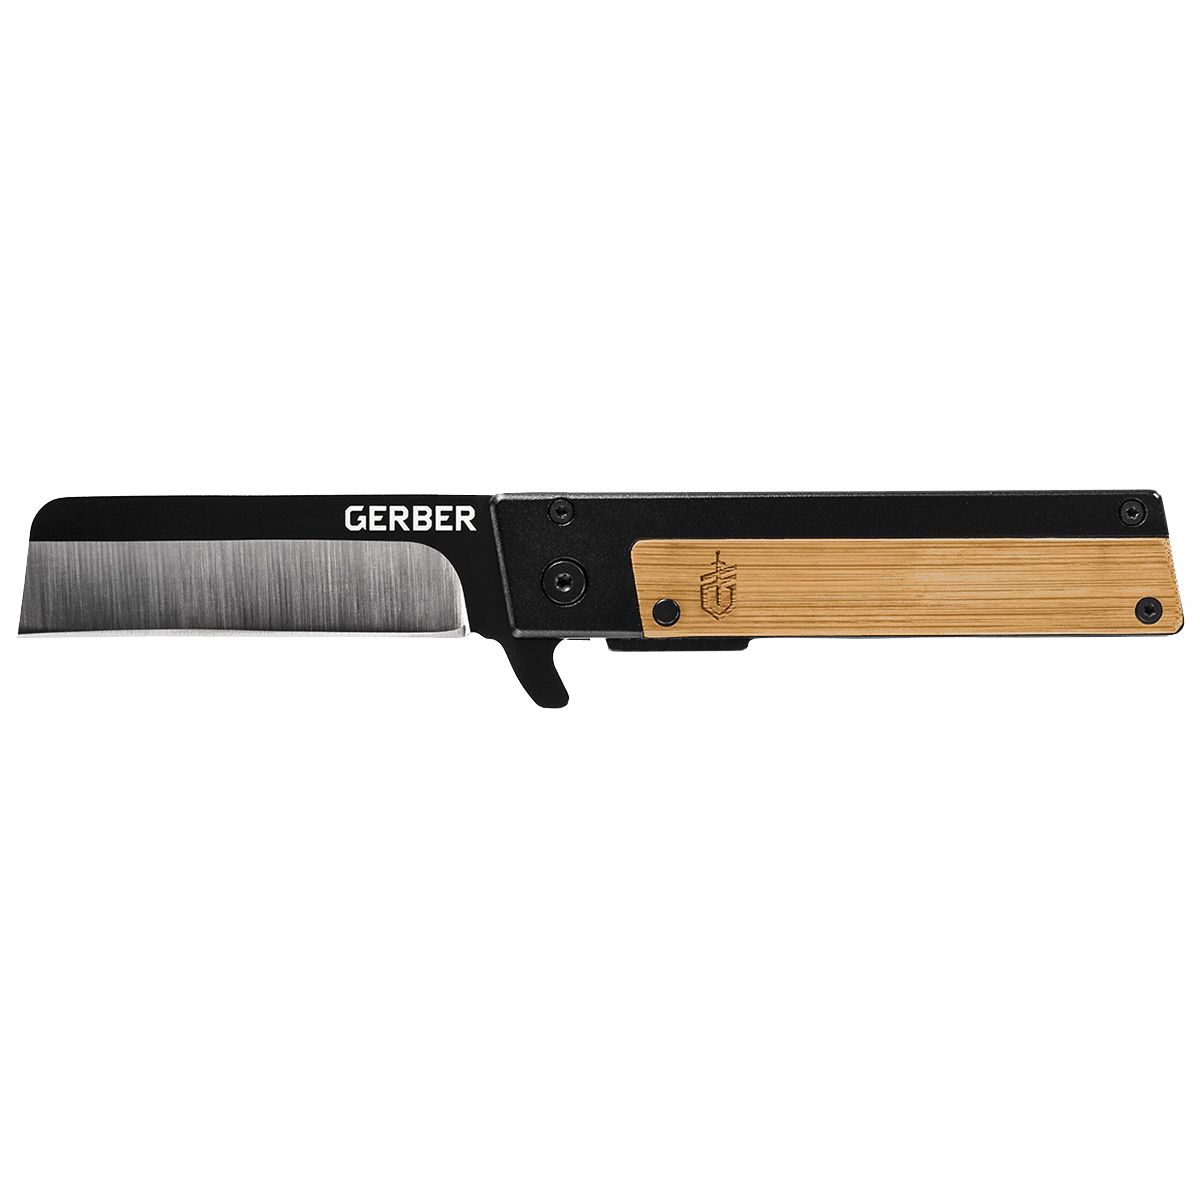 31-003731 Flipper Knife, 2.7 in L Blade, 7Cr17MoV Stainless Steel Blade, Bamboo Handle